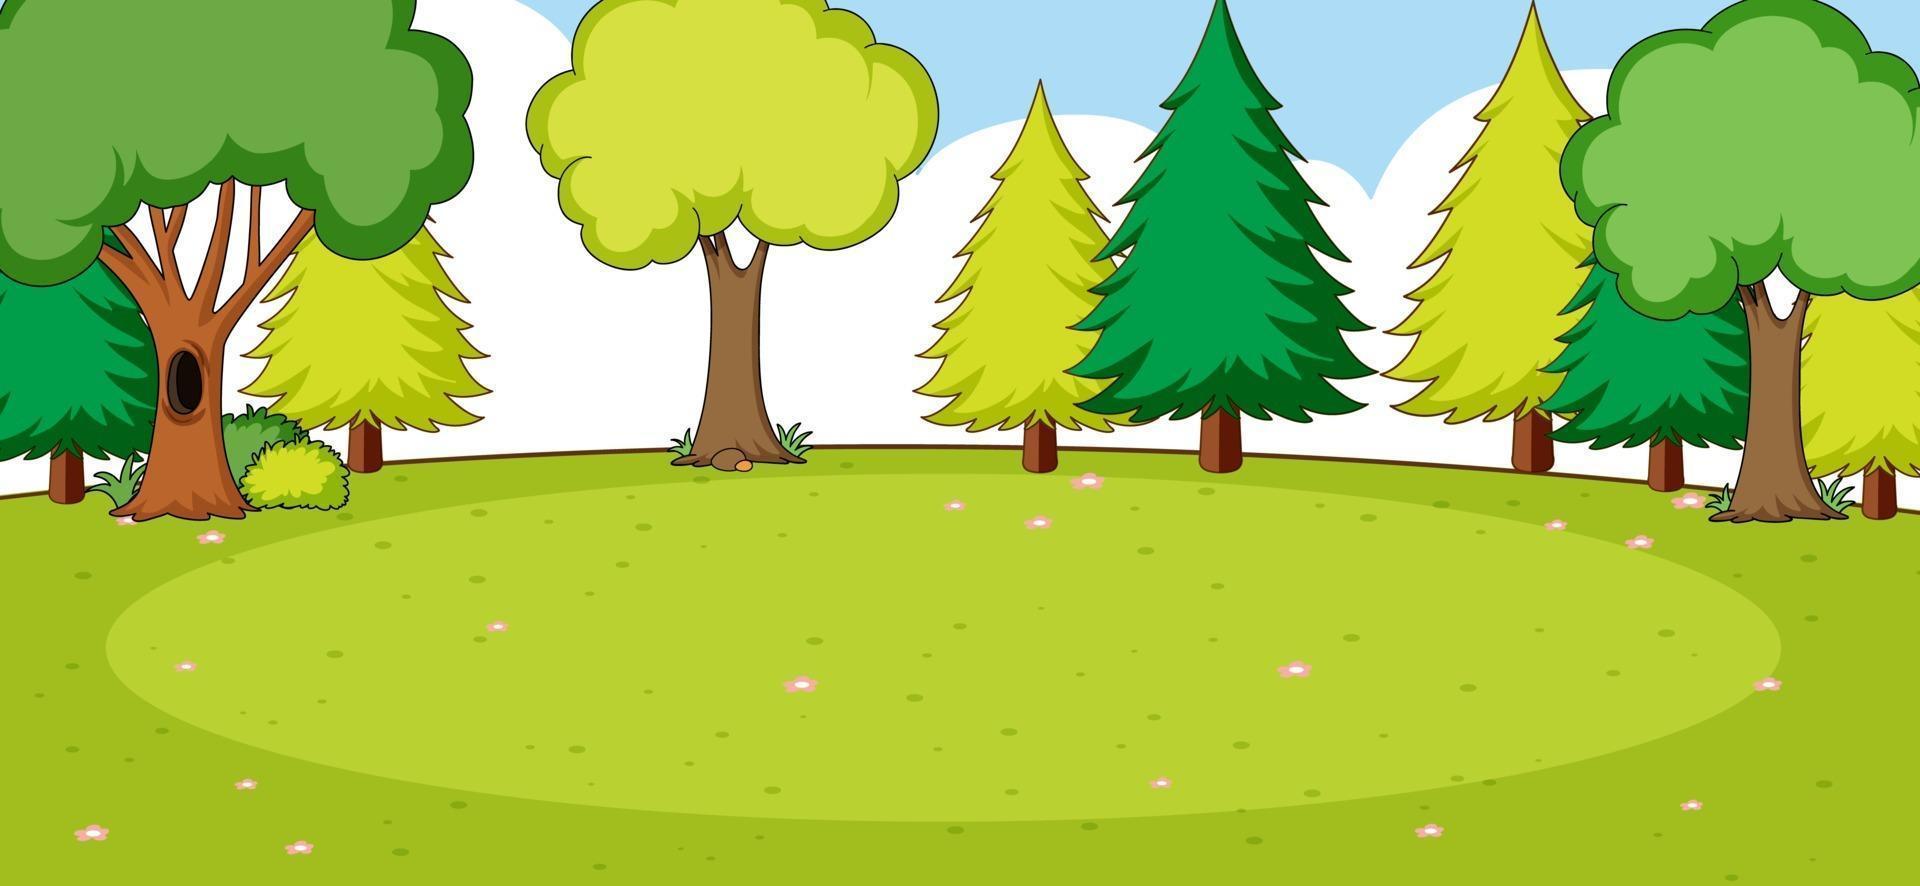 Empty park landscape scene with many trees and blank meadow vector